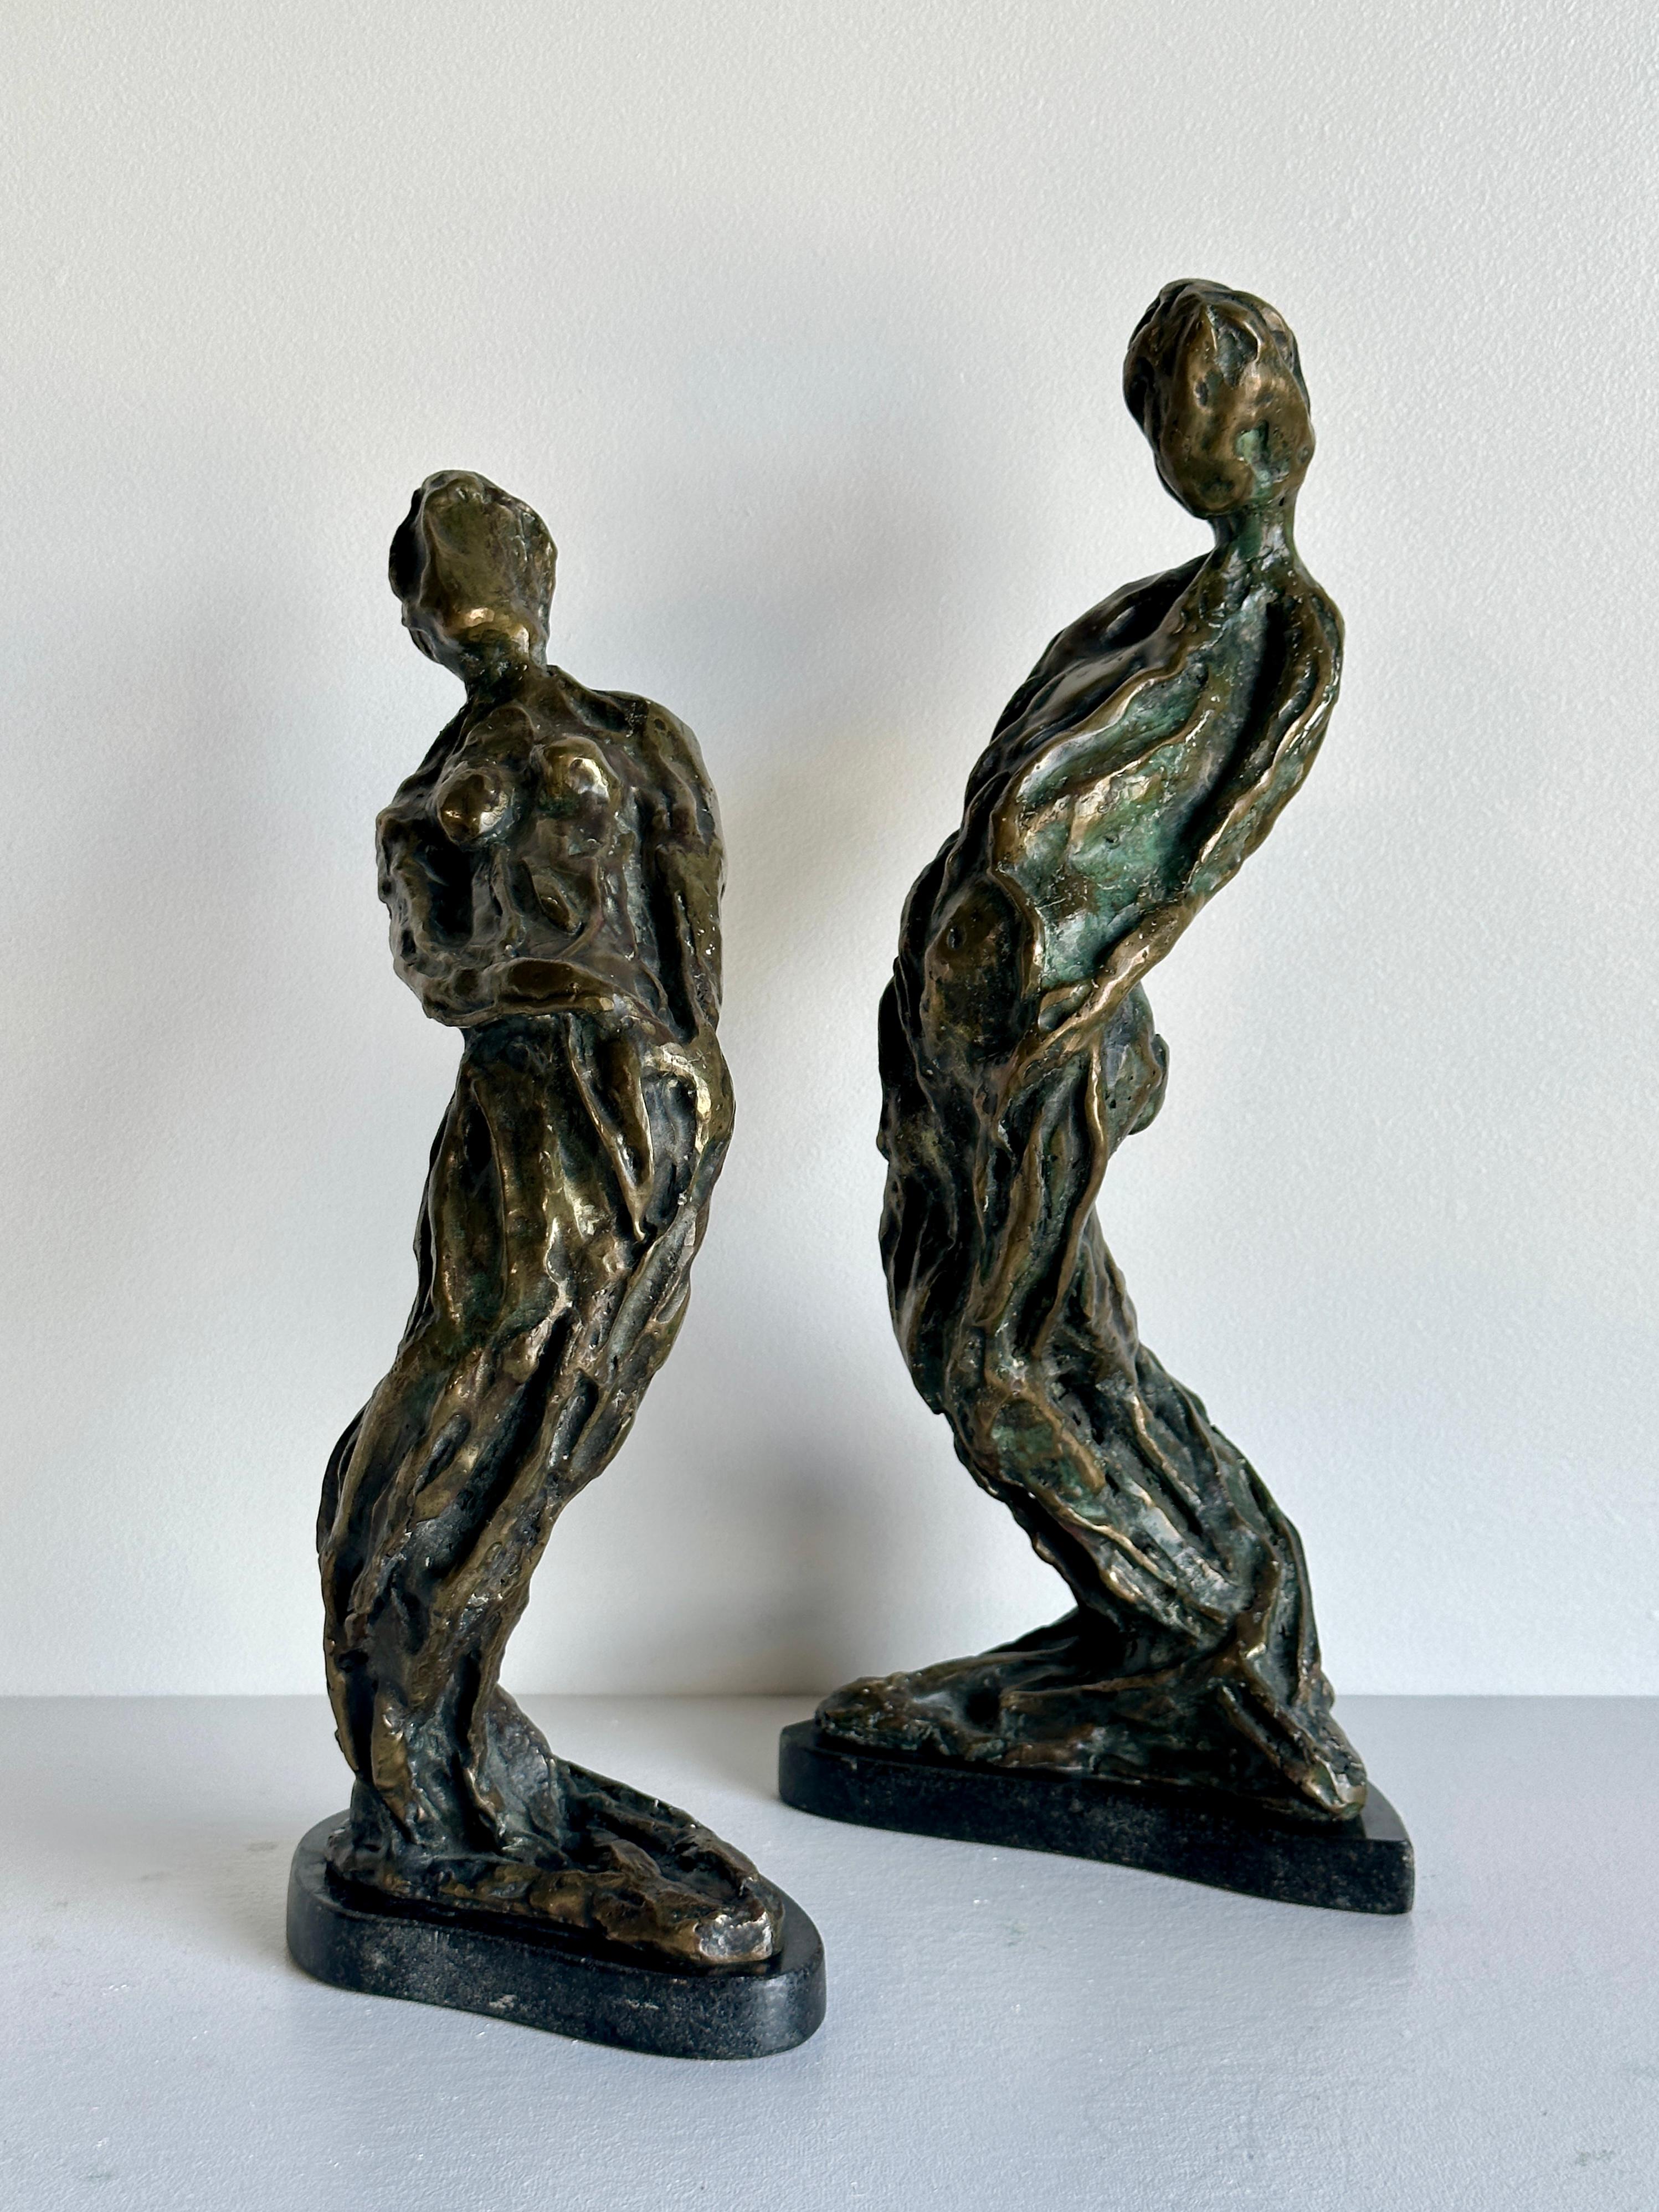 Modernist Figurative abstract bronze sculptures, a pair In Excellent Condition For Sale In Greensboro, NC